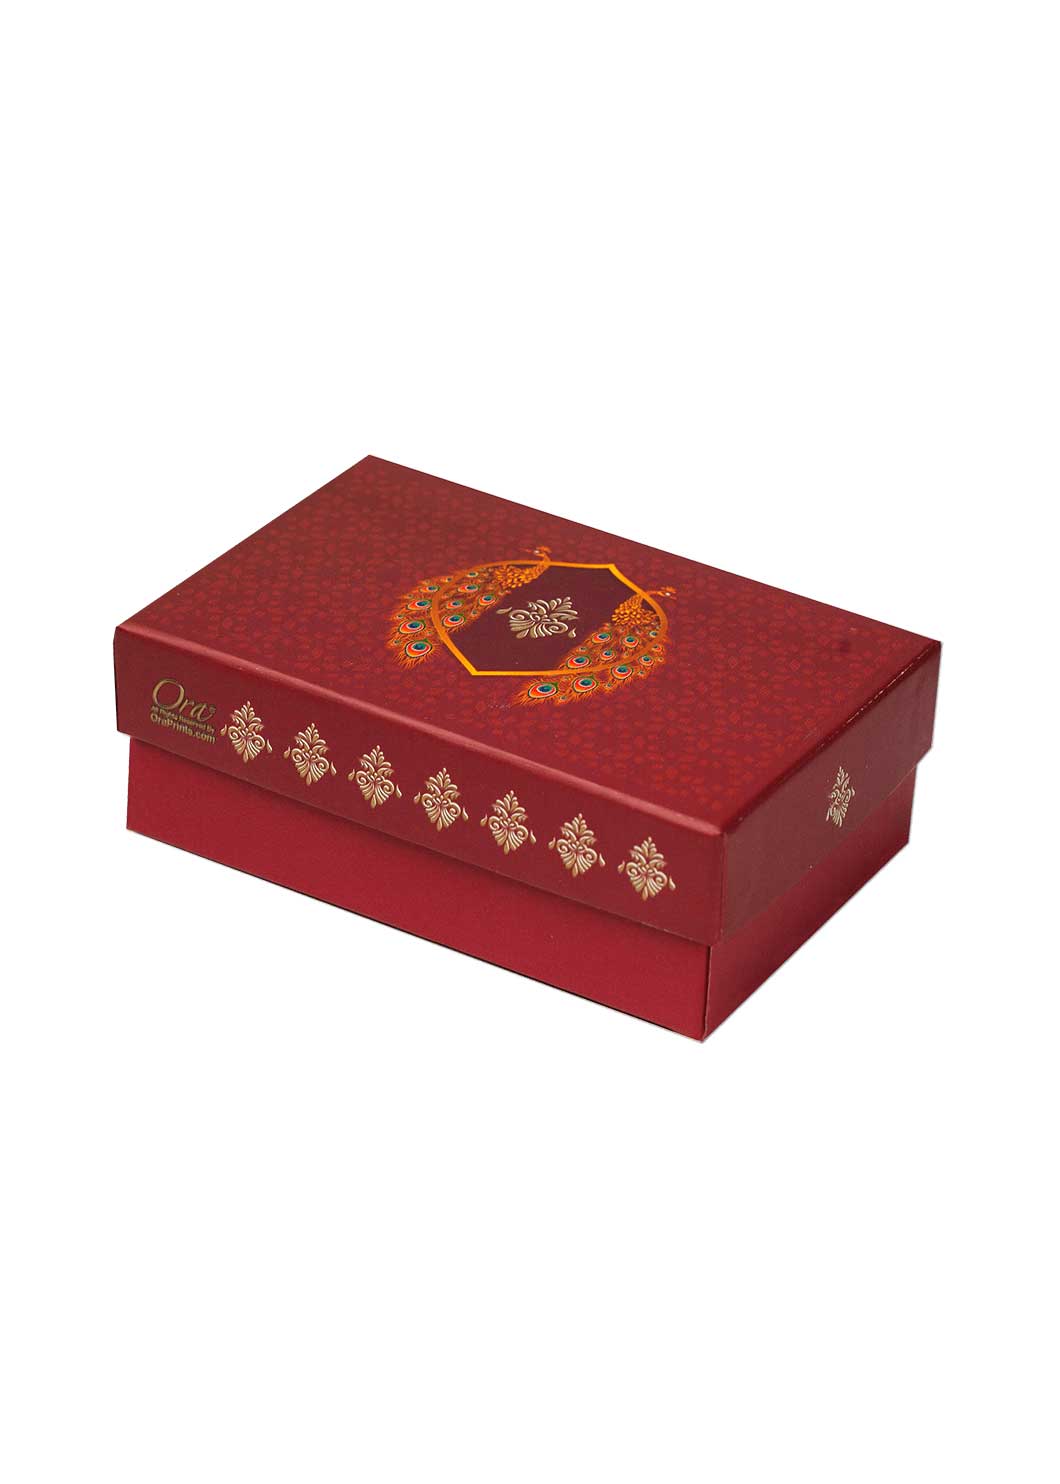 Beautiful Peacock Red & Gold Design Box for Packing